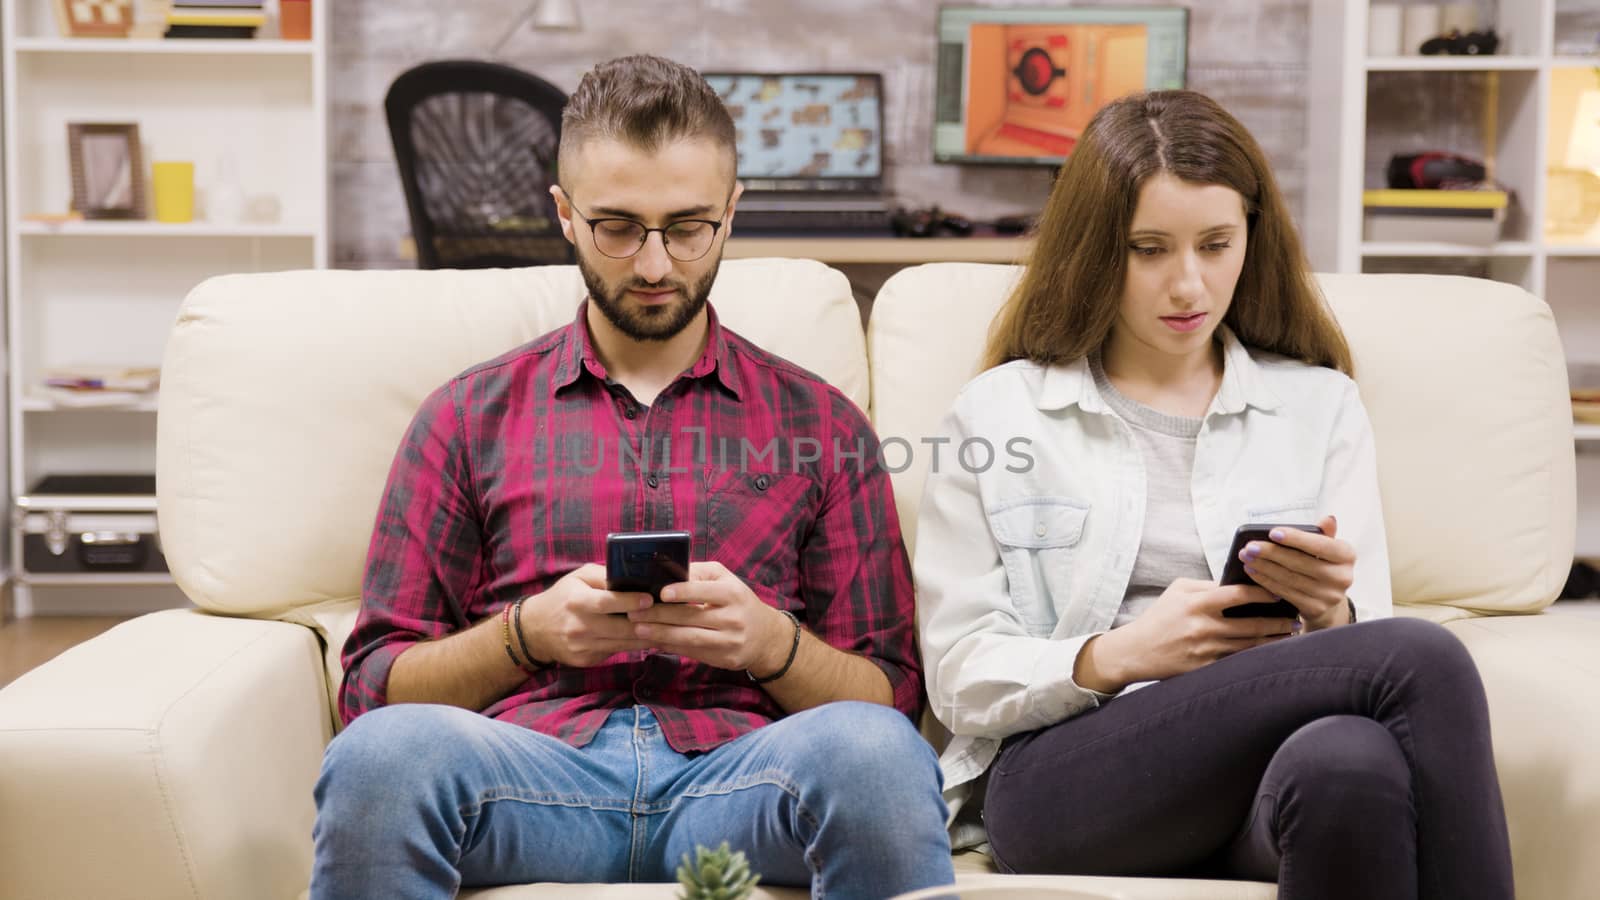 Caucasian couple sitting on the couch browsing on their phones. Boyfriend and girlfriend.